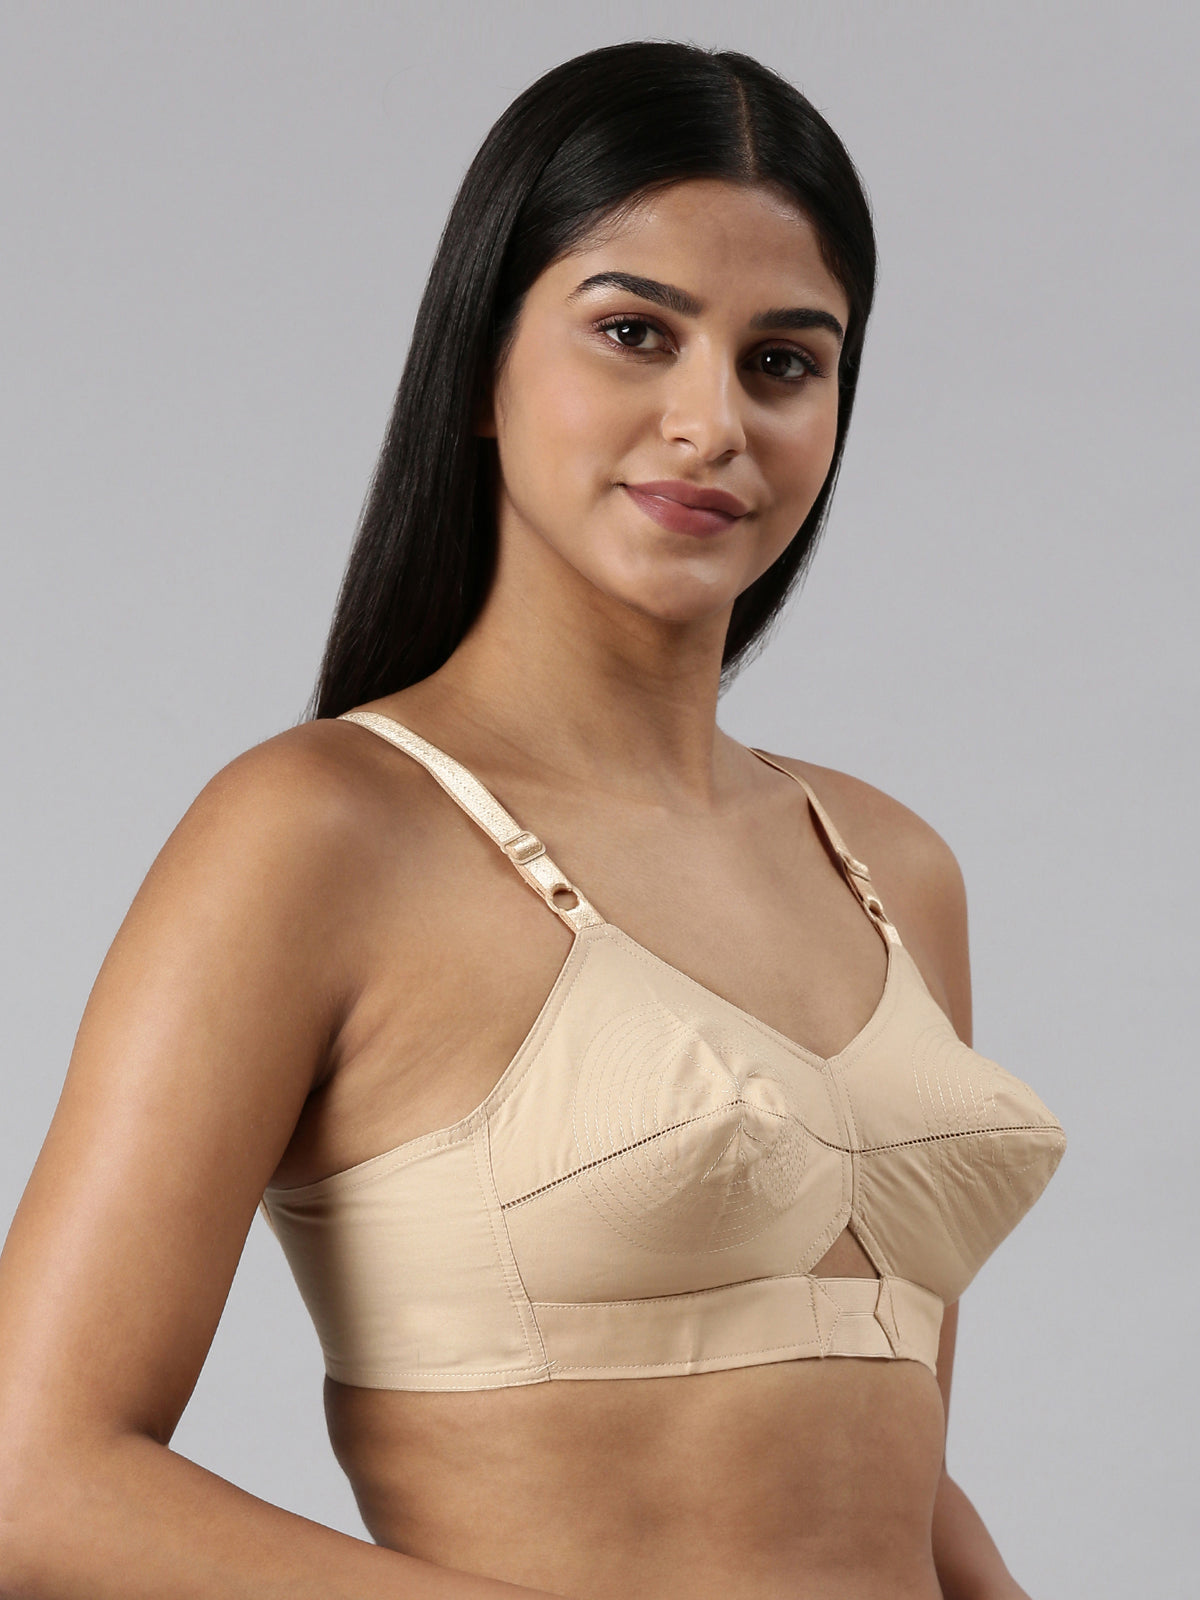 blossom-authentic bra-B Cup-skin3-Woven cotton-everyday bra